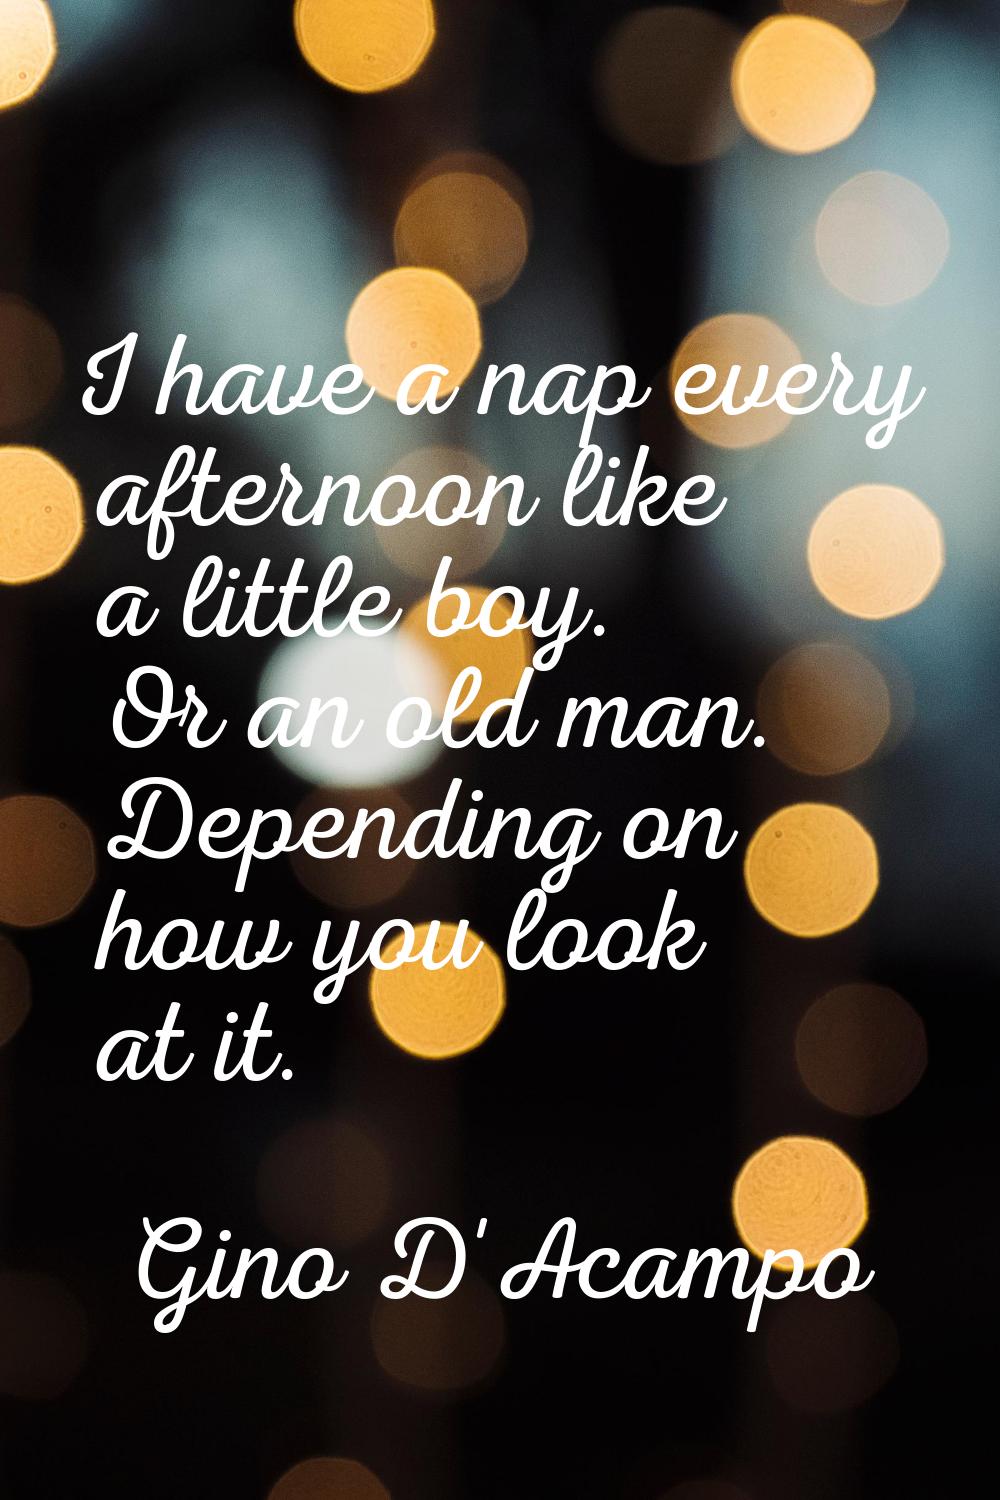 I have a nap every afternoon like a little boy. Or an old man. Depending on how you look at it.